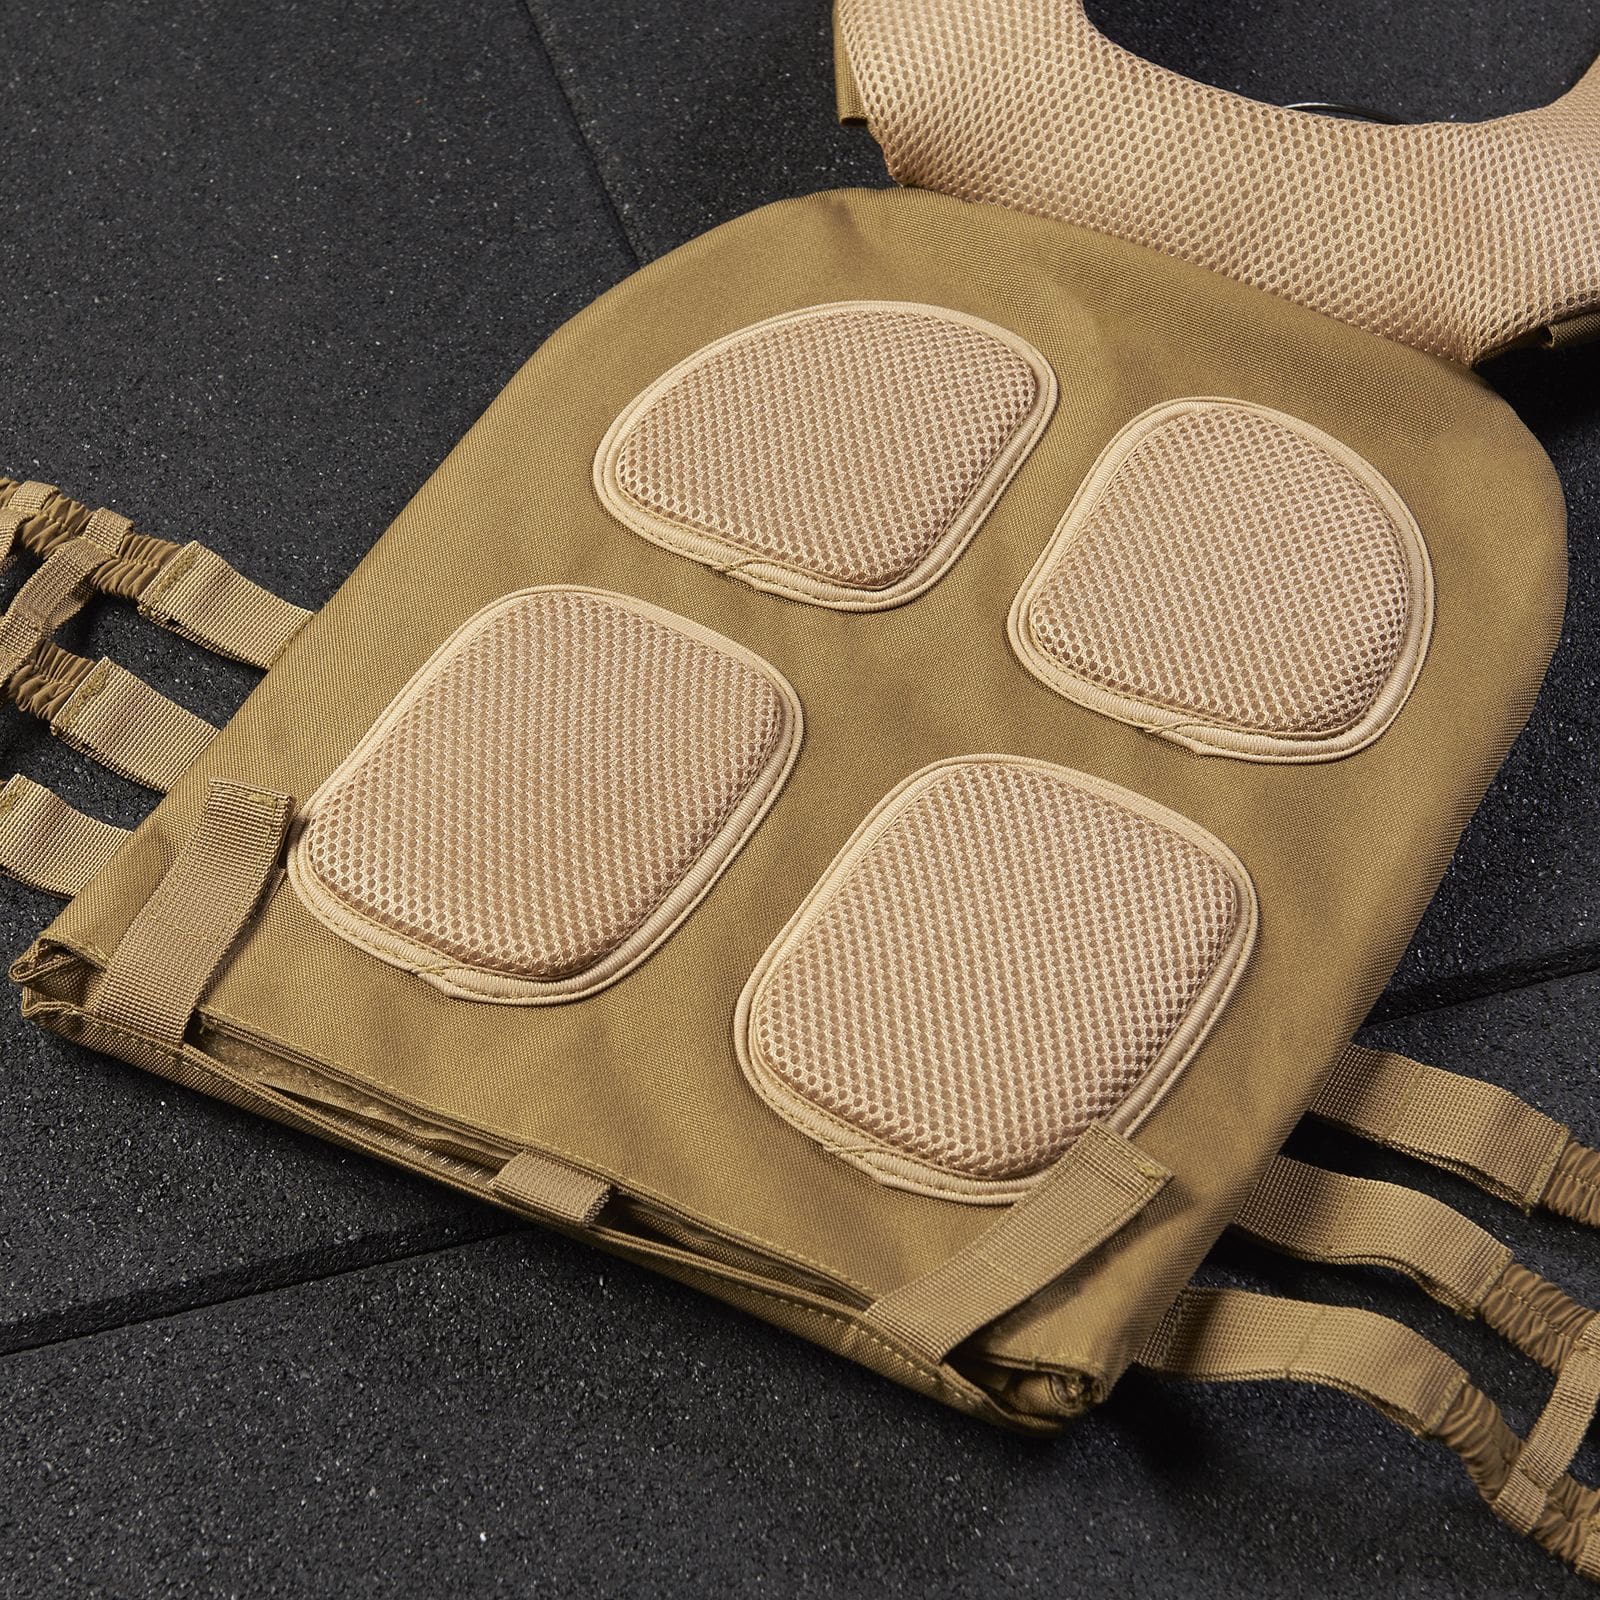 Mirafit Tactical Weight Vest - Review - Up Close4